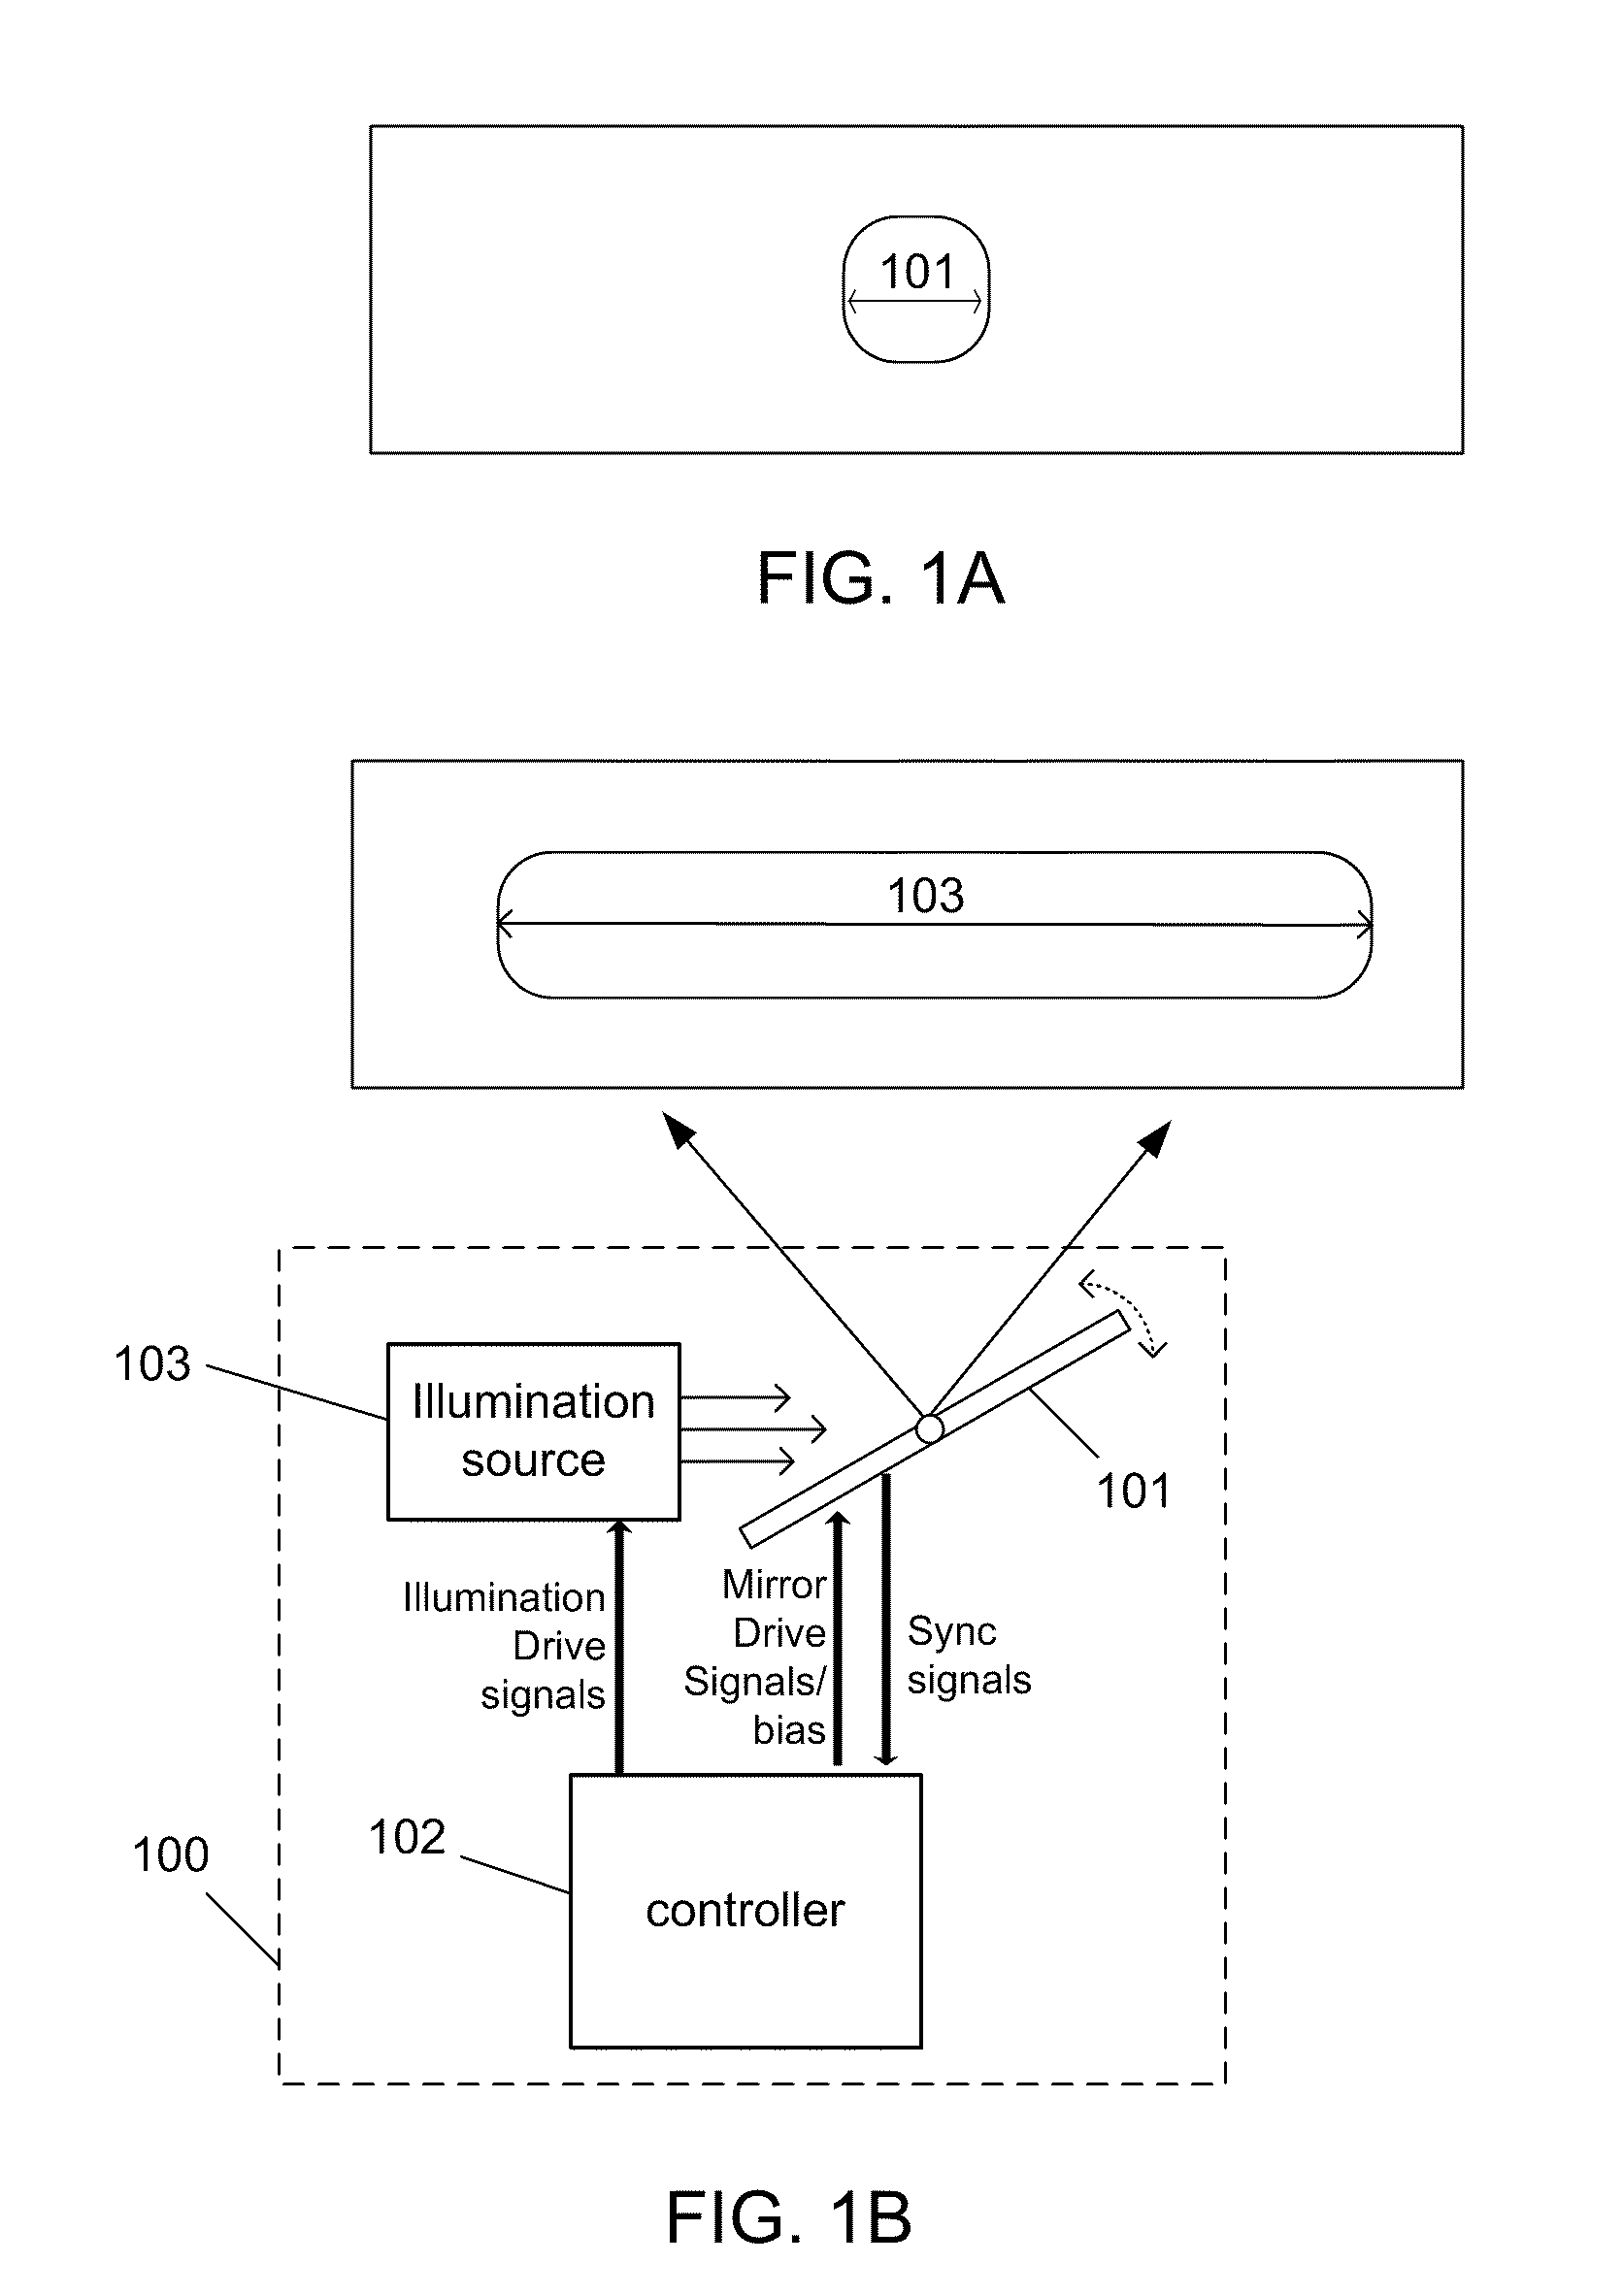 Devices and methods for generating beam patterns with controllable intensity, color, or information content